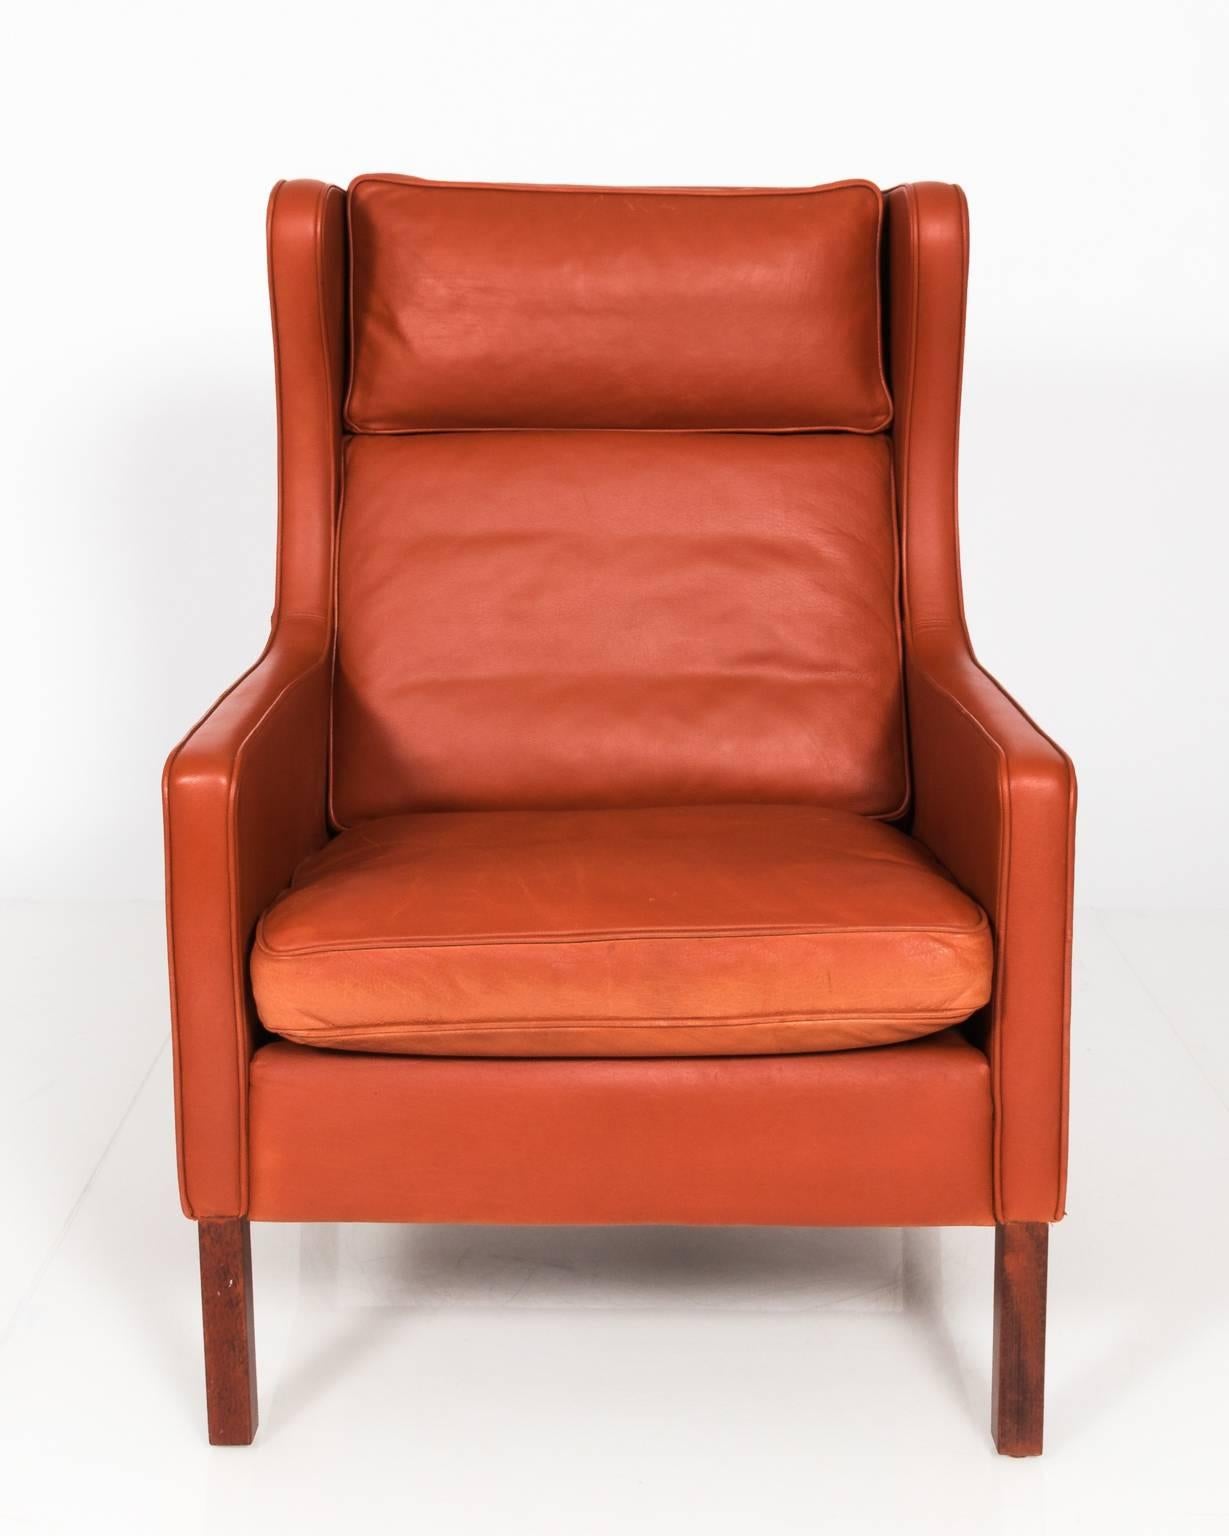 Late 20th Century Stouby Leather Wing Chair and Ottoman, Denmark, circa 1970s